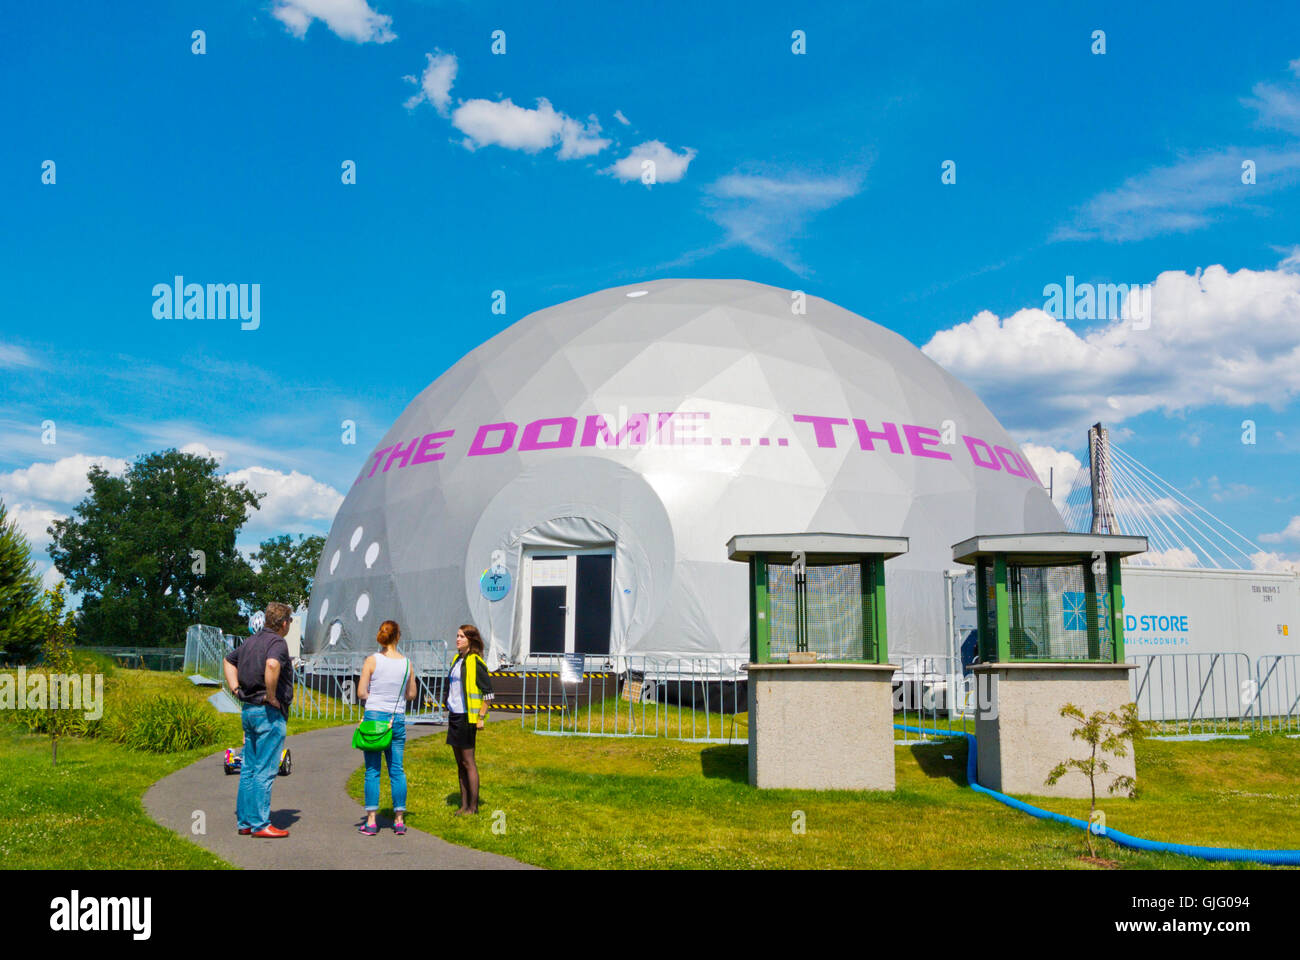 The Sirius Domes, temporary exhibition tents outside Kopernikus Science Centre, Park Odkrywcow, Warsaw, Poland Stock Photo